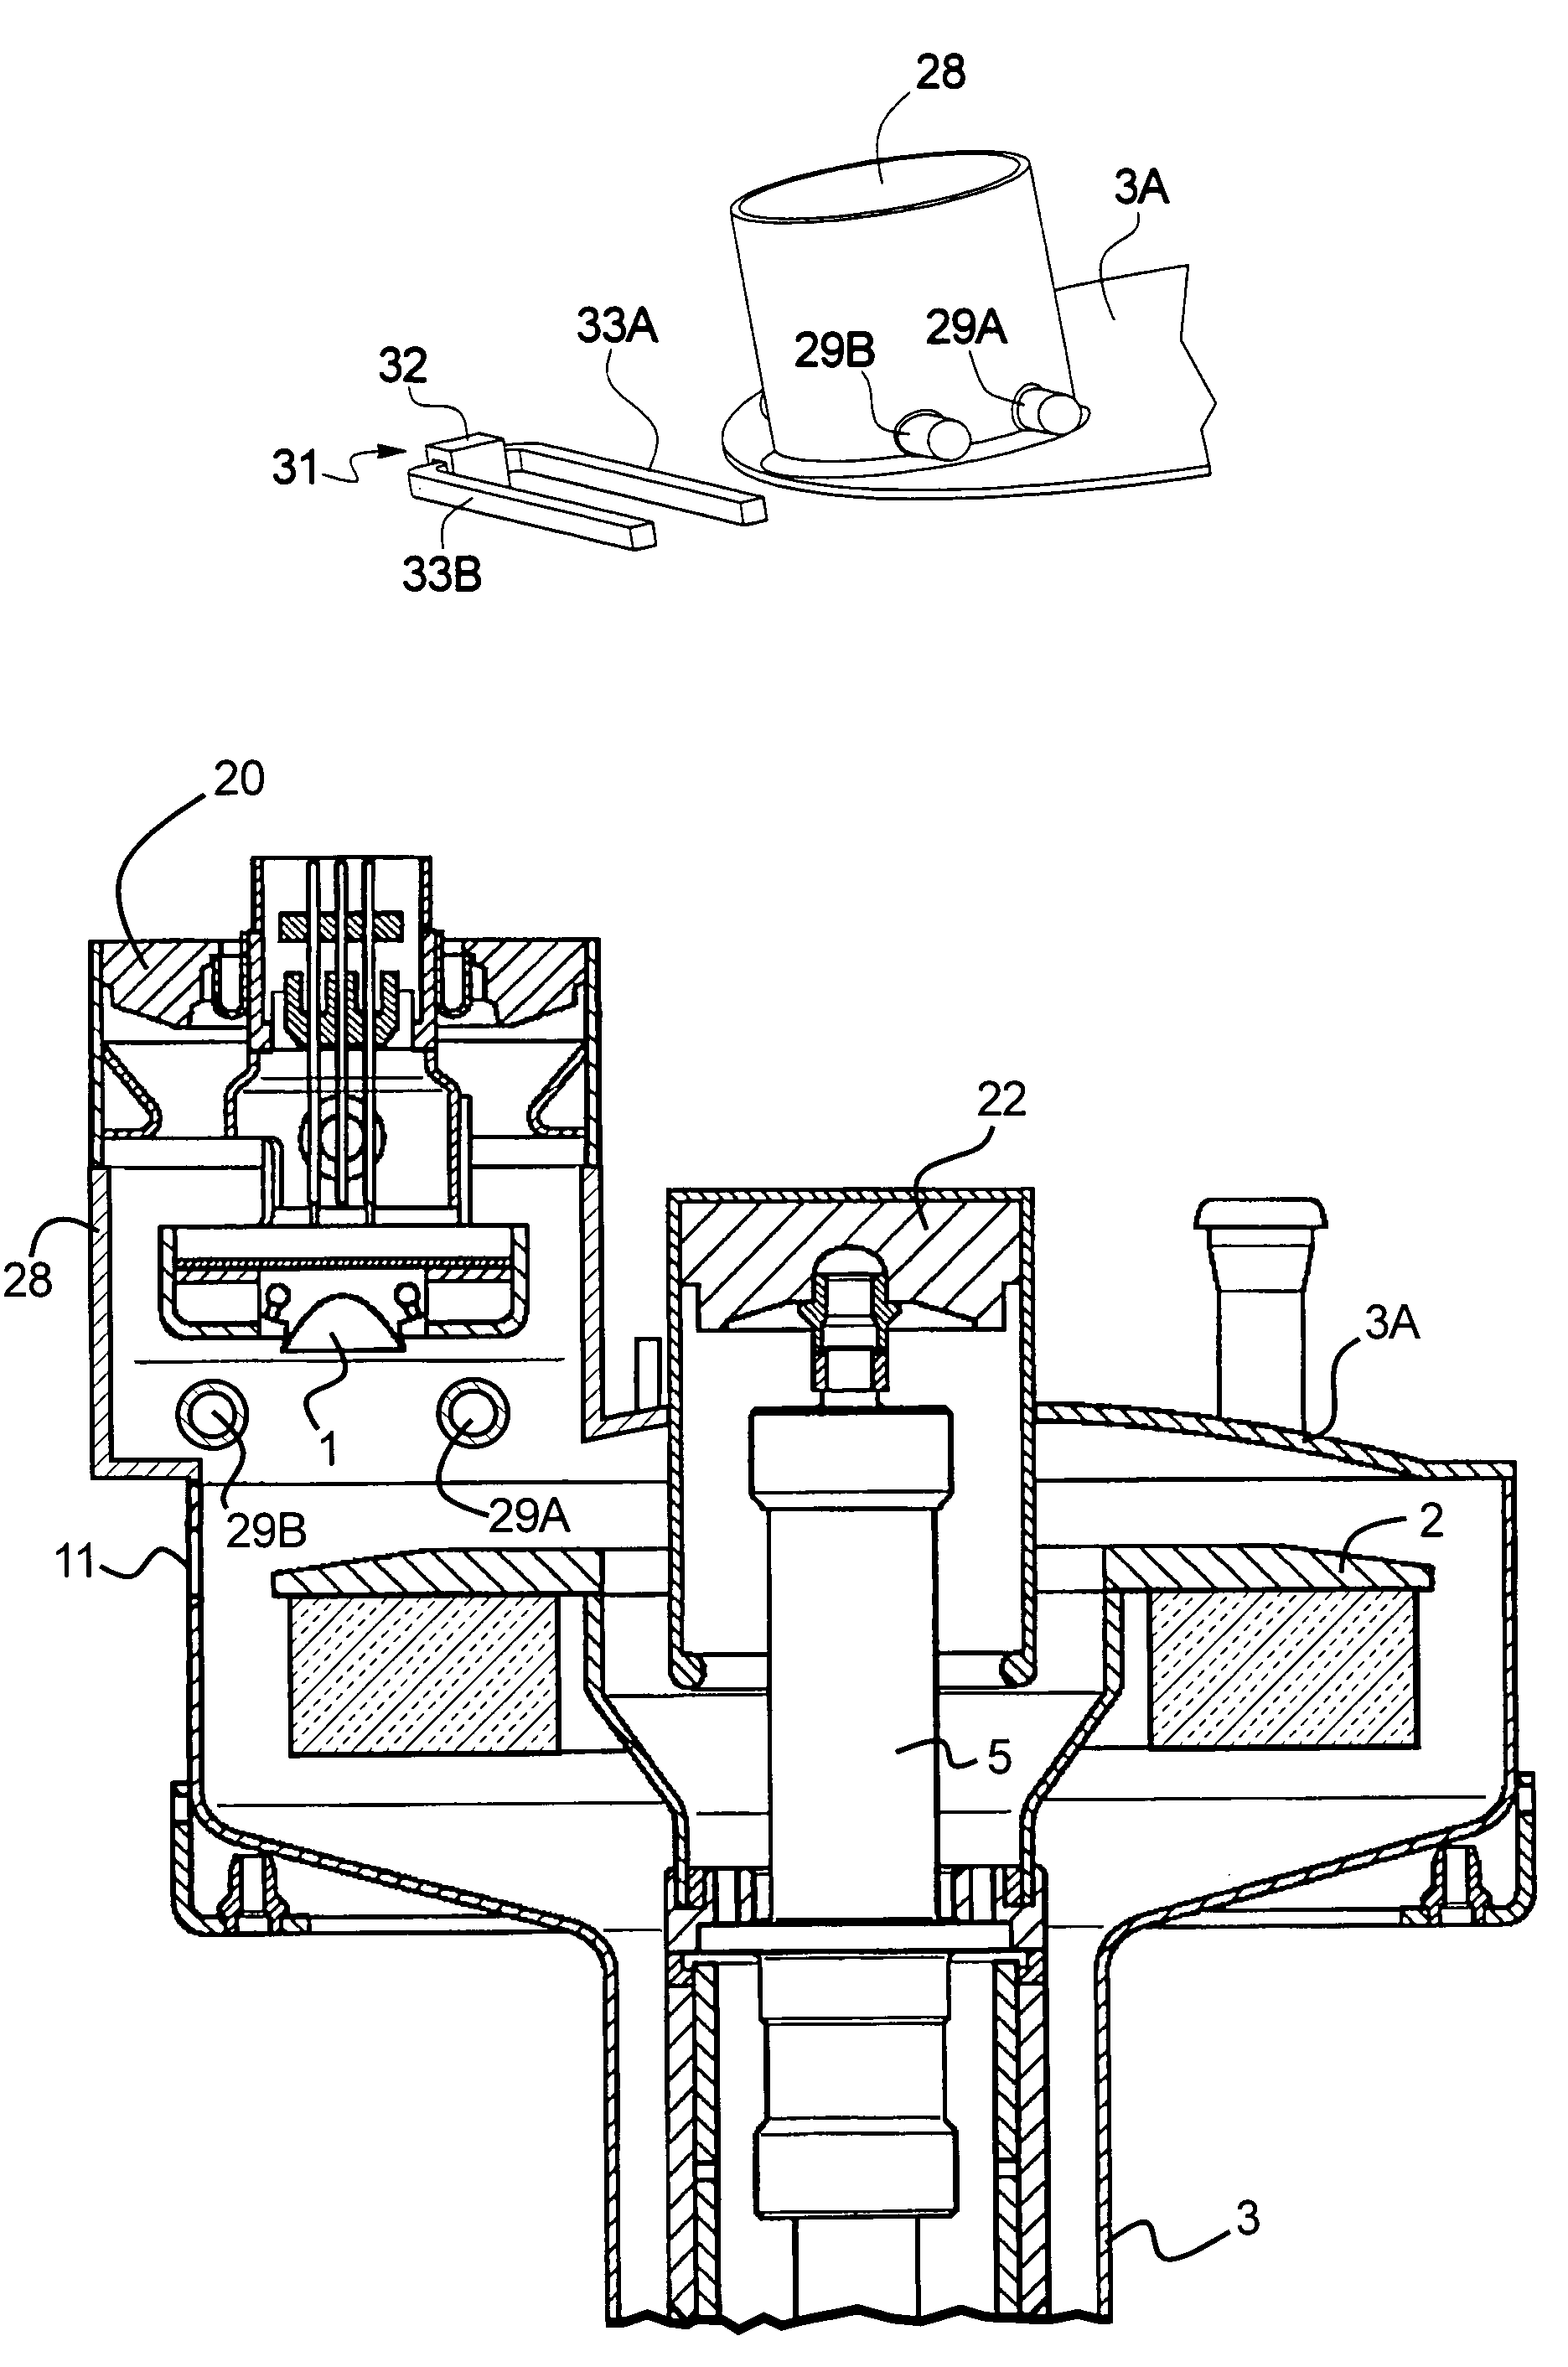 X-ray tube with housing adapted to receive and hold an electron beam deflector